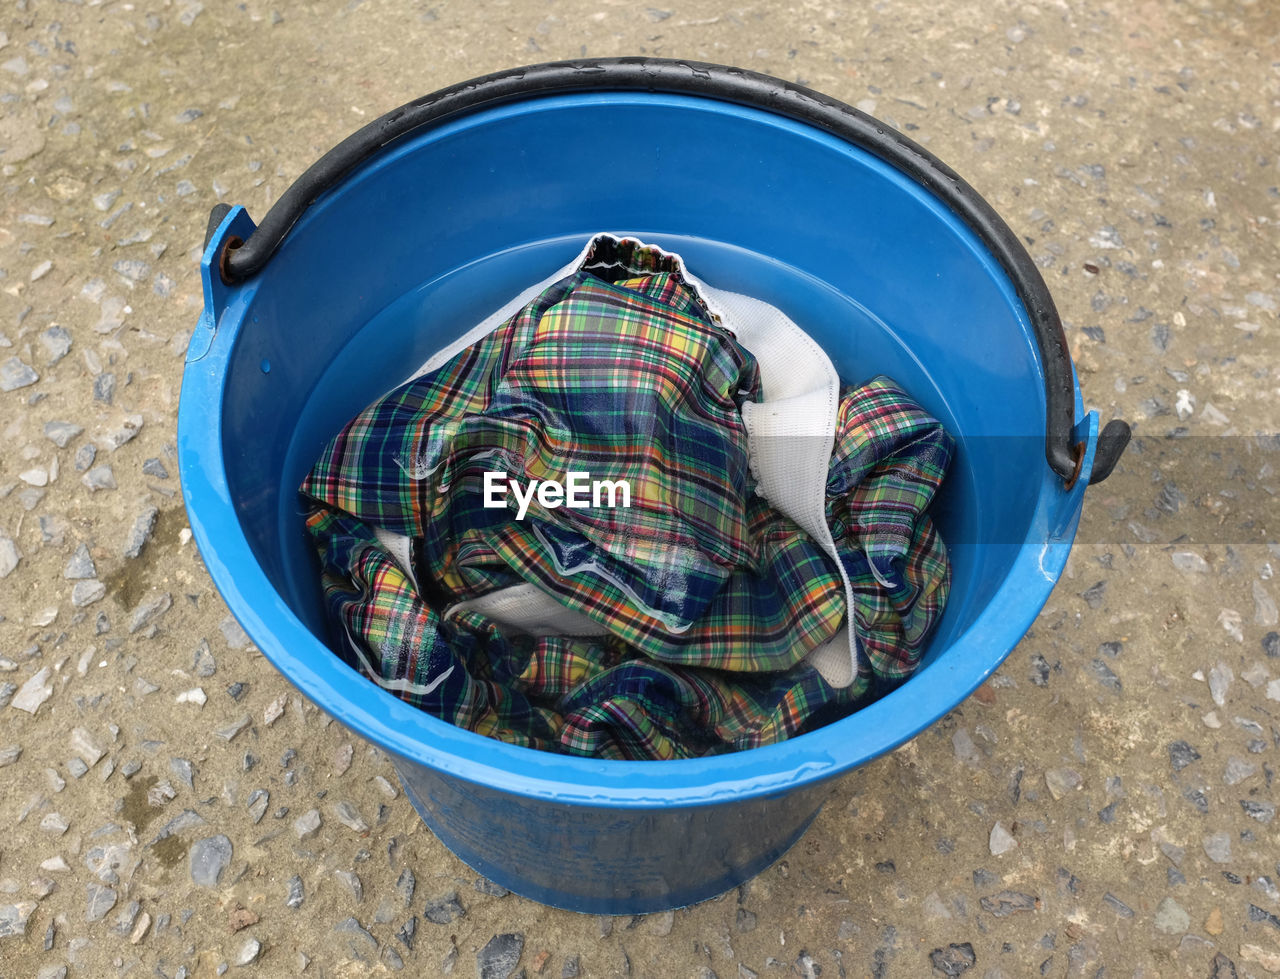 
clothes soaked in a tub for hand washing.